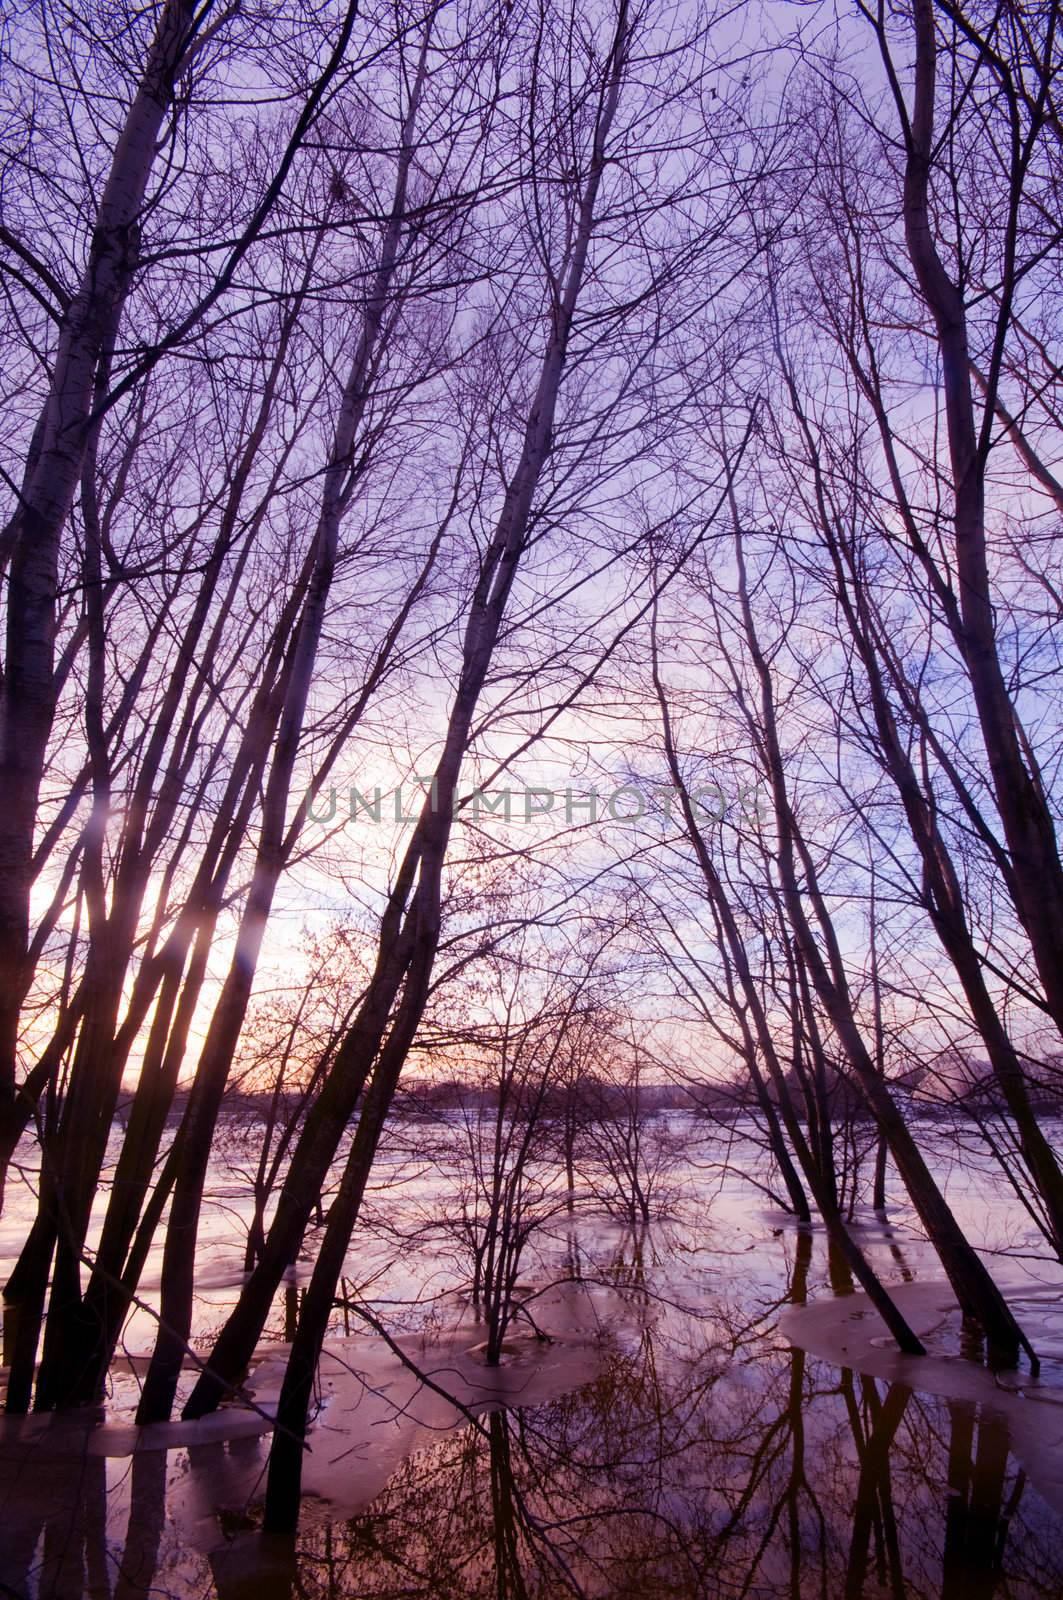 Trees silhouettes in water during sunset